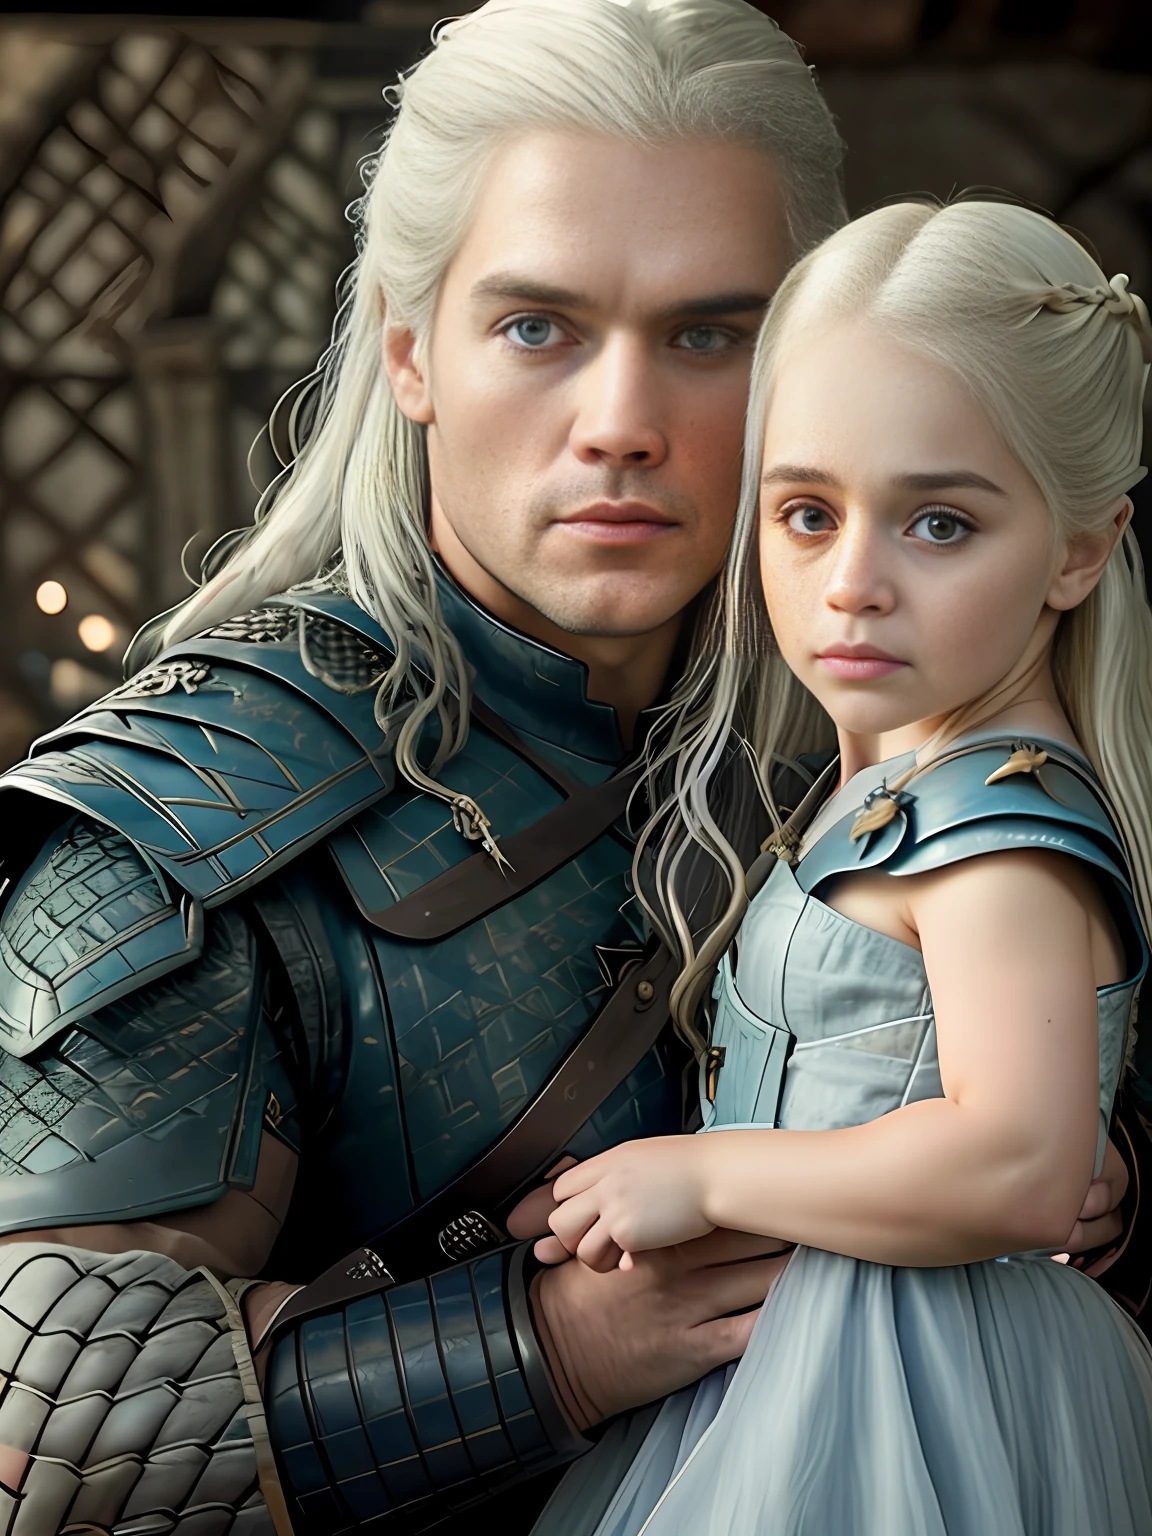 raw fullbody ((family photo of beautiful, 1girl, [daenerys targaryen|Emilia Clarke], (1man, Henry Cavill as Geralt de Rivia The Witcher), playing with their ((5 year old daughter)))), medieval clothing,((full body shot)), realistic proportions, realistic pupils, ((3 member family portrait)) limited palette, highres, cinematic lighting, 8k resolution, front lit, sunrise, RAW photo, Nikon 85mm, Award Winning, Glamour Photograph, extremely detailed, beautiful Ukrainian, mind-bending, Noth-Yidik, raw fullbody photo of Daenerys Targaryen and Geralt de Rivia The Witcher with 5 year old daughter, highly detailed, artstation, smooth, sharp focus, 8K,, trending on instagram, trending on tumblr, hdr 4k, 8k